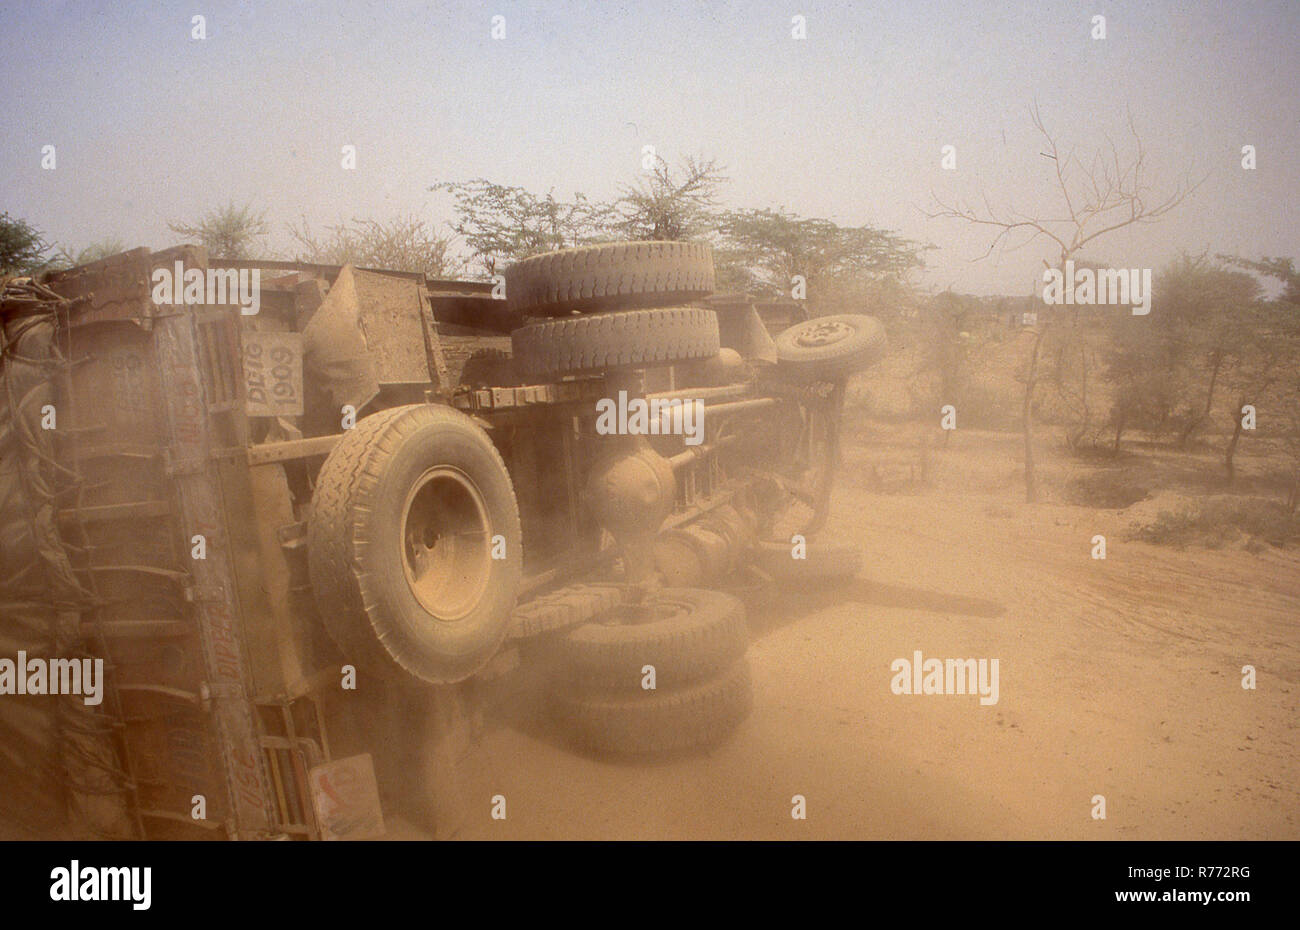 1970s, daytime and a crashed truck or goods vehicle in the African desert, upended and lying on its side on the sandy, arid terrain. Stock Photo